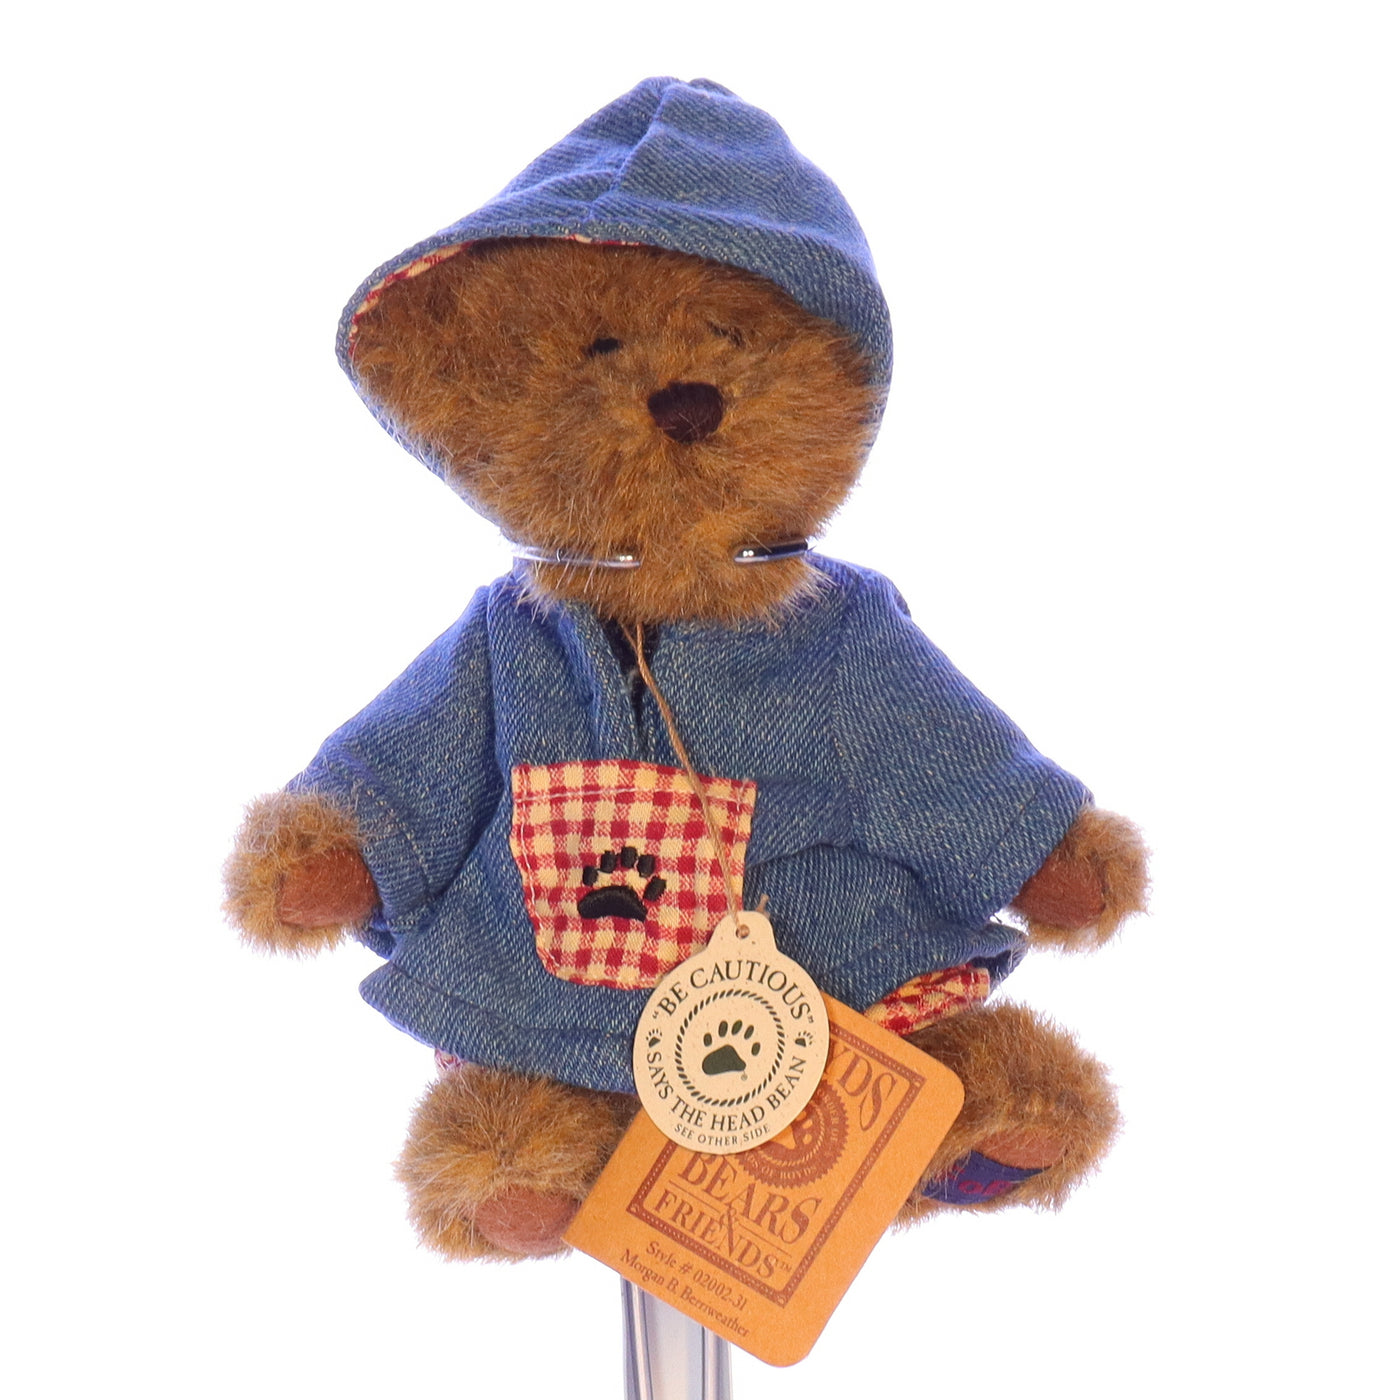 Boyds Bears Collection Plush with Tags Limited Edition 02002-31 1988 6"